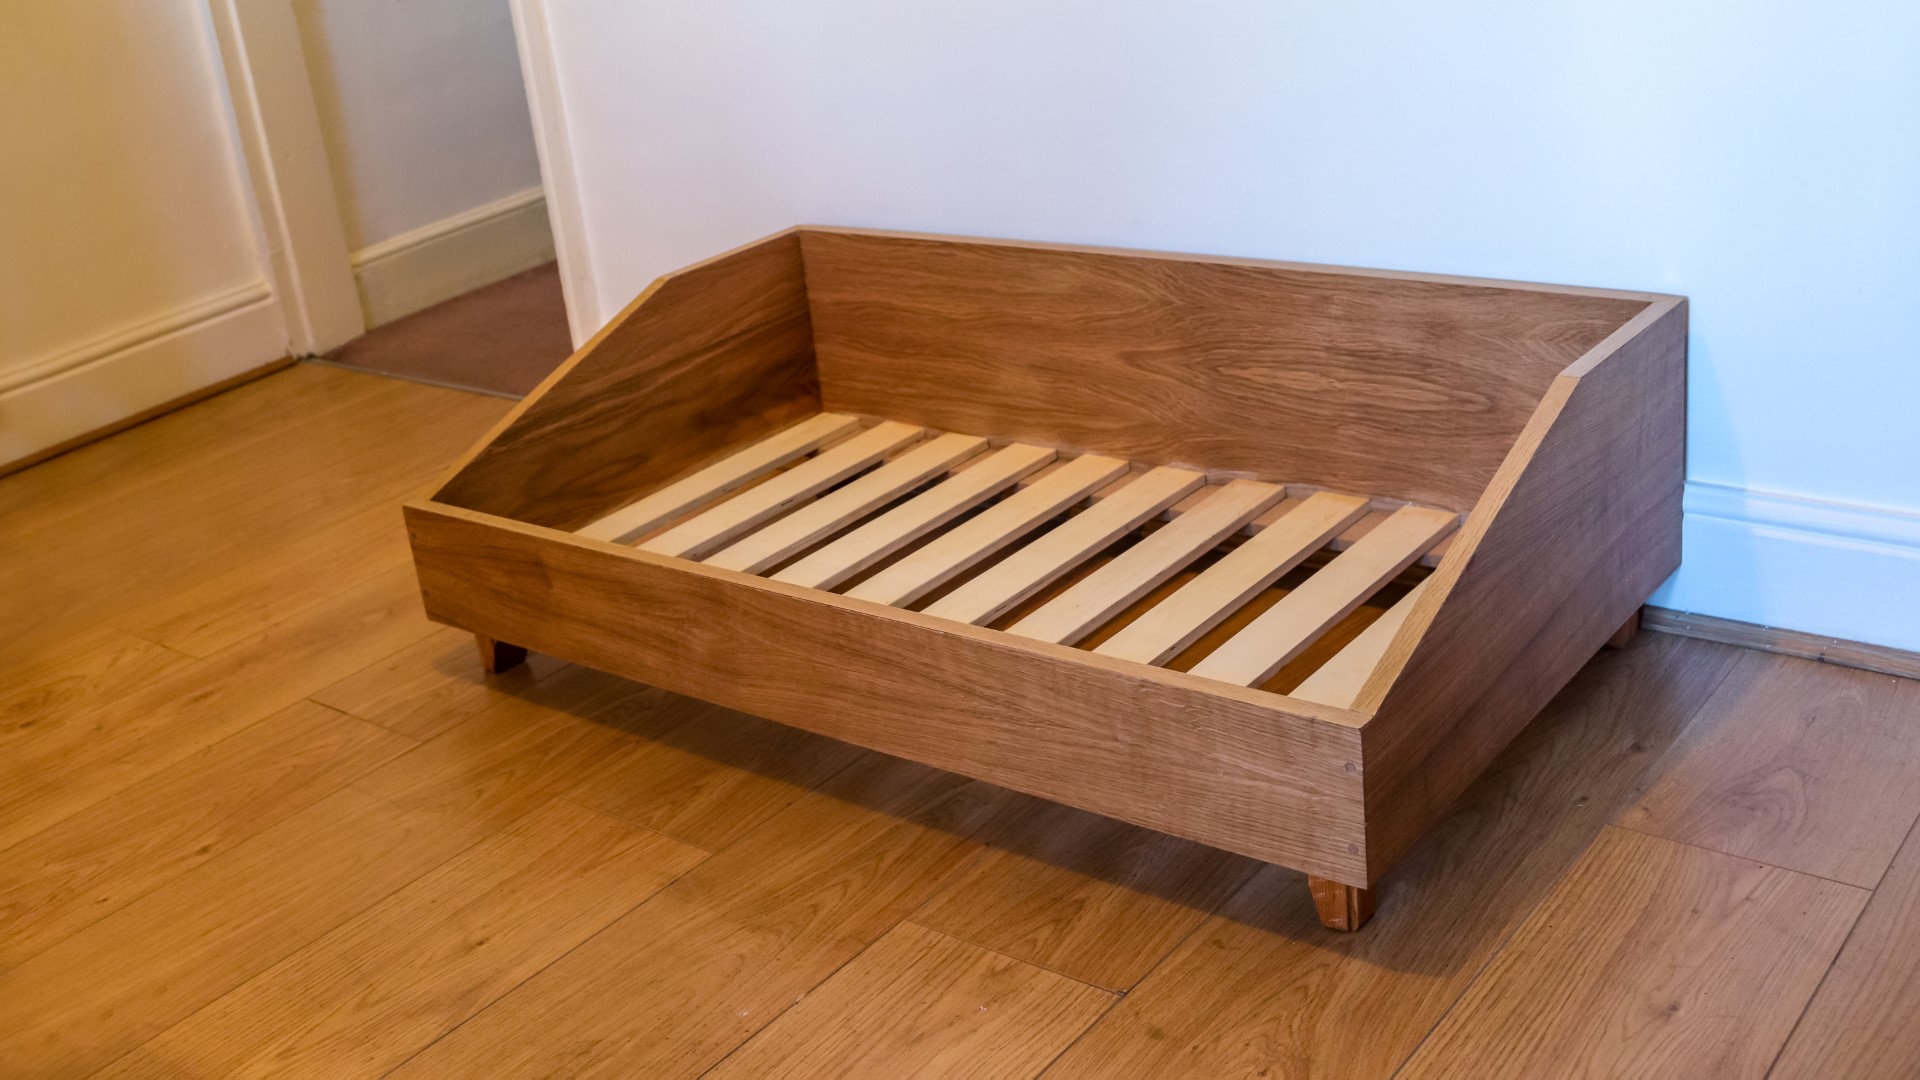 Wooden Dog Bed Company made